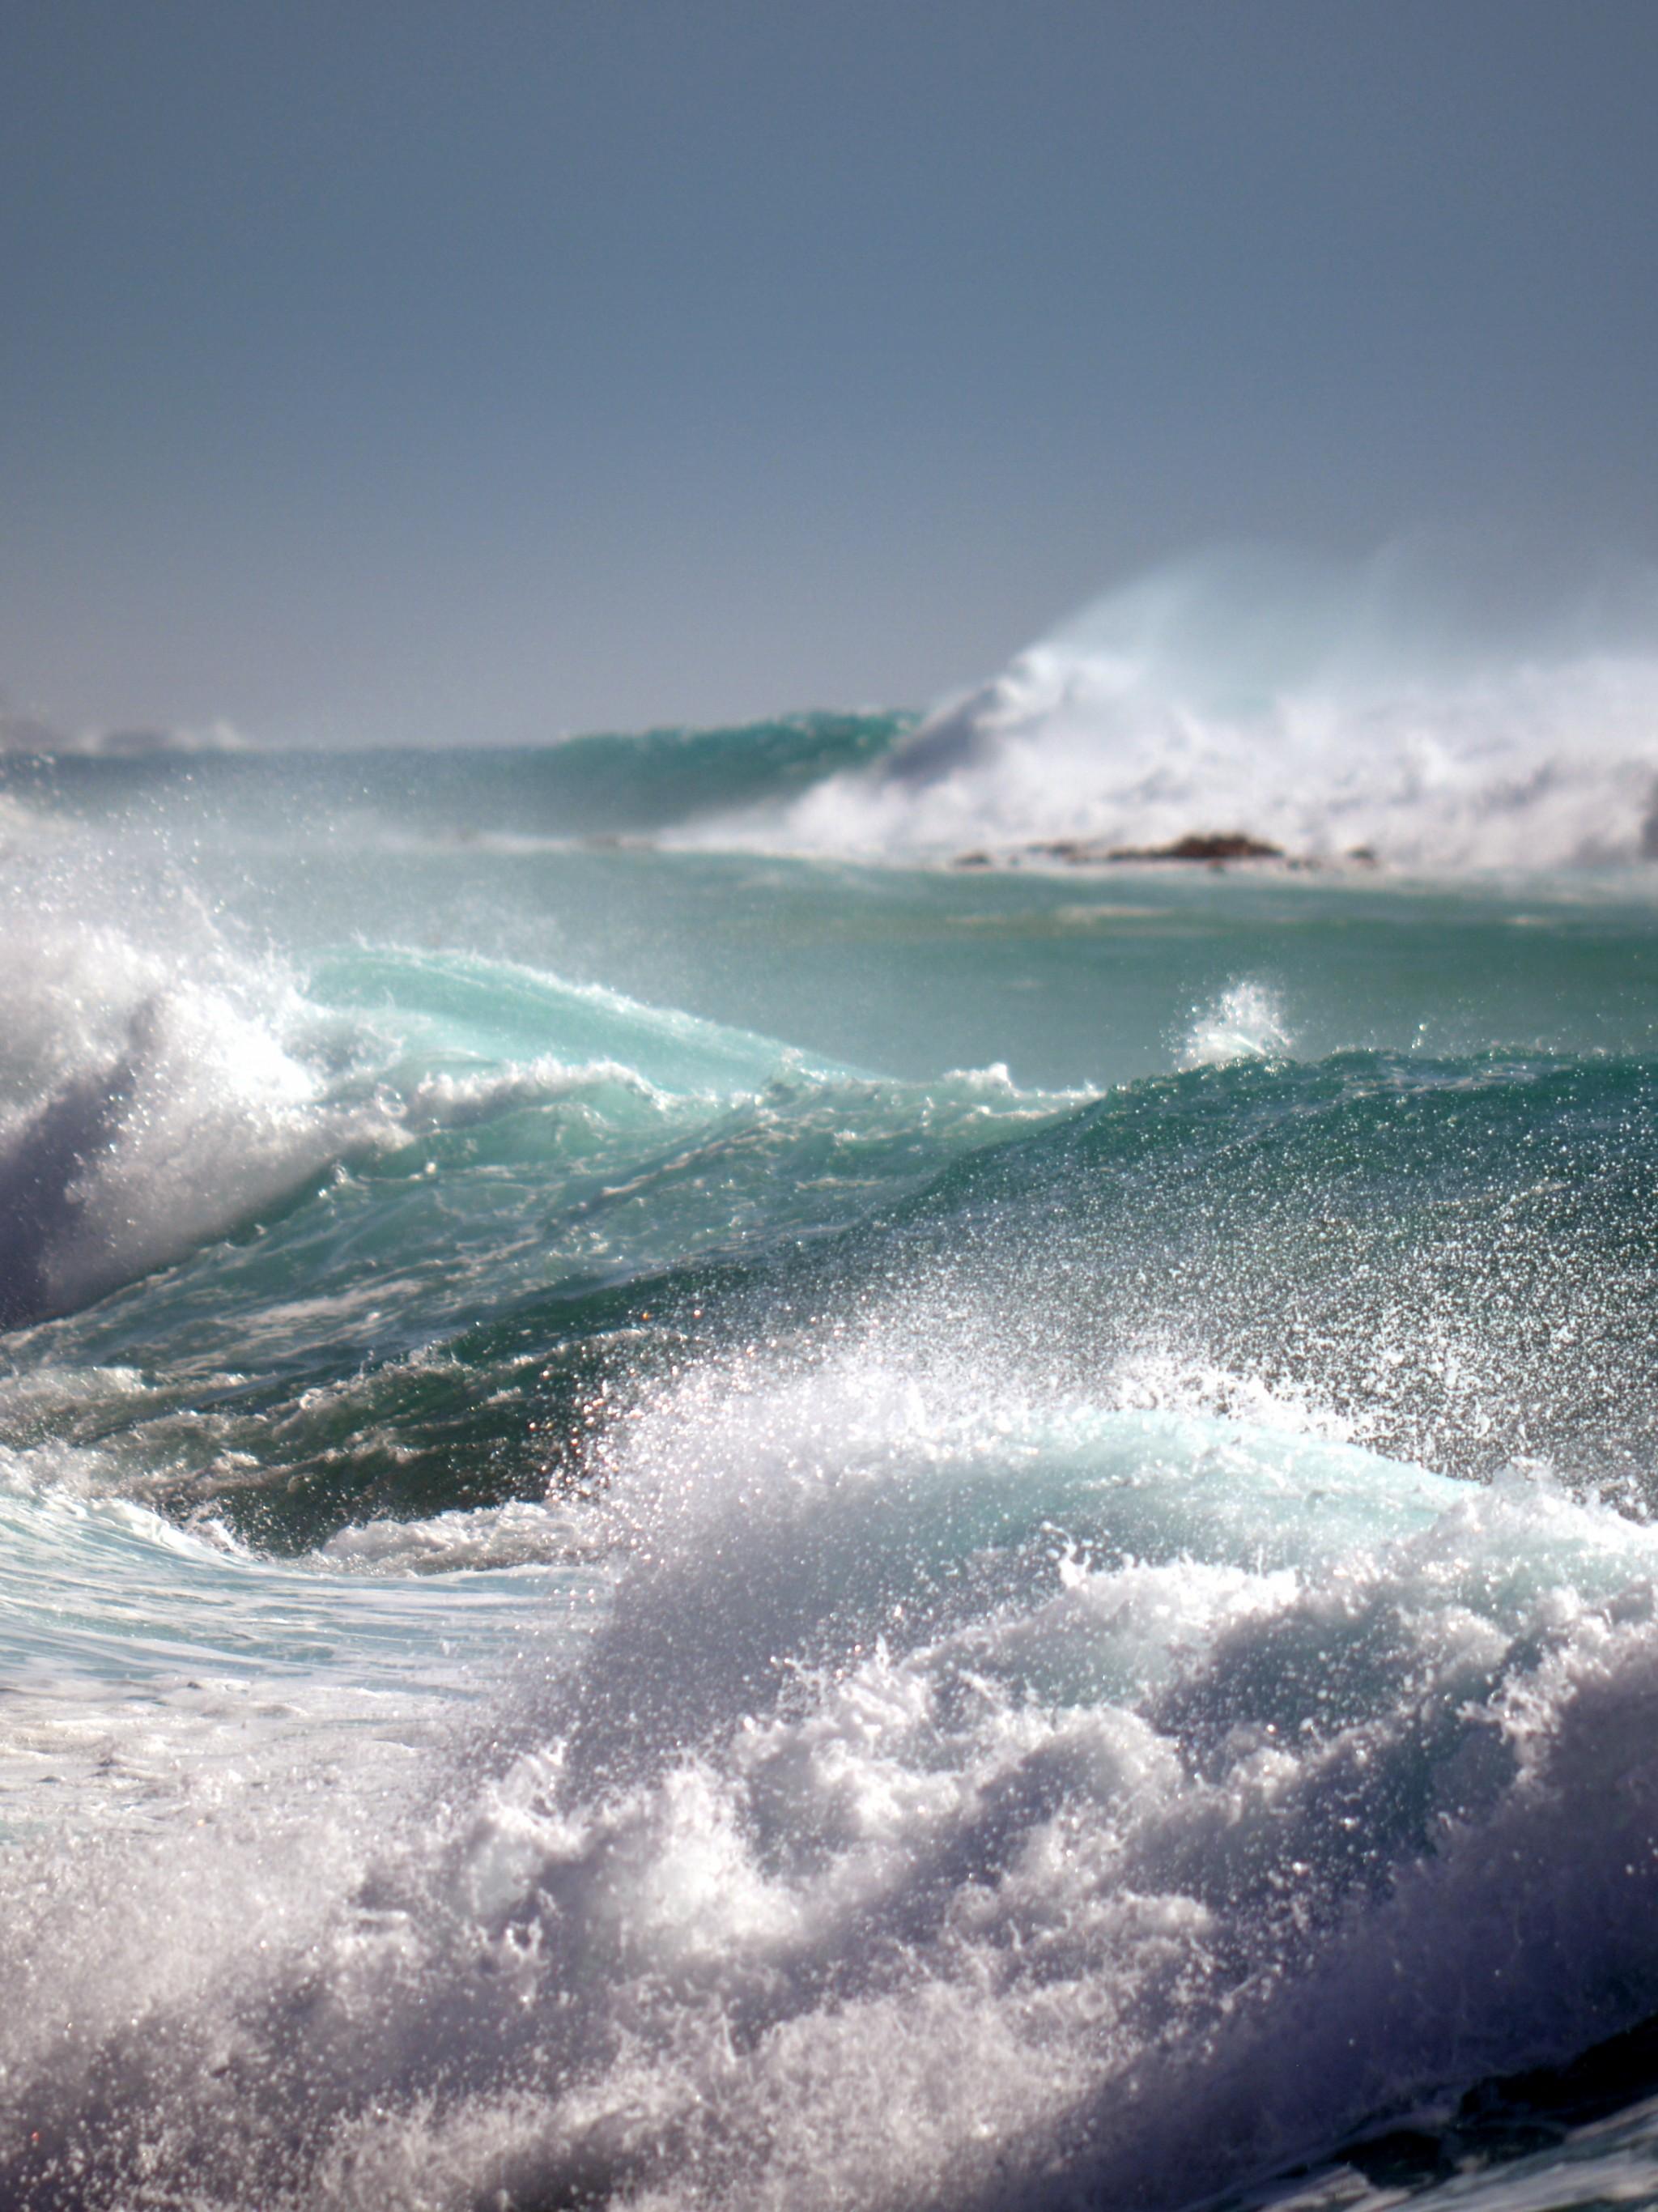 Stormy Sea Wallpaper - (37++ Image Collections)